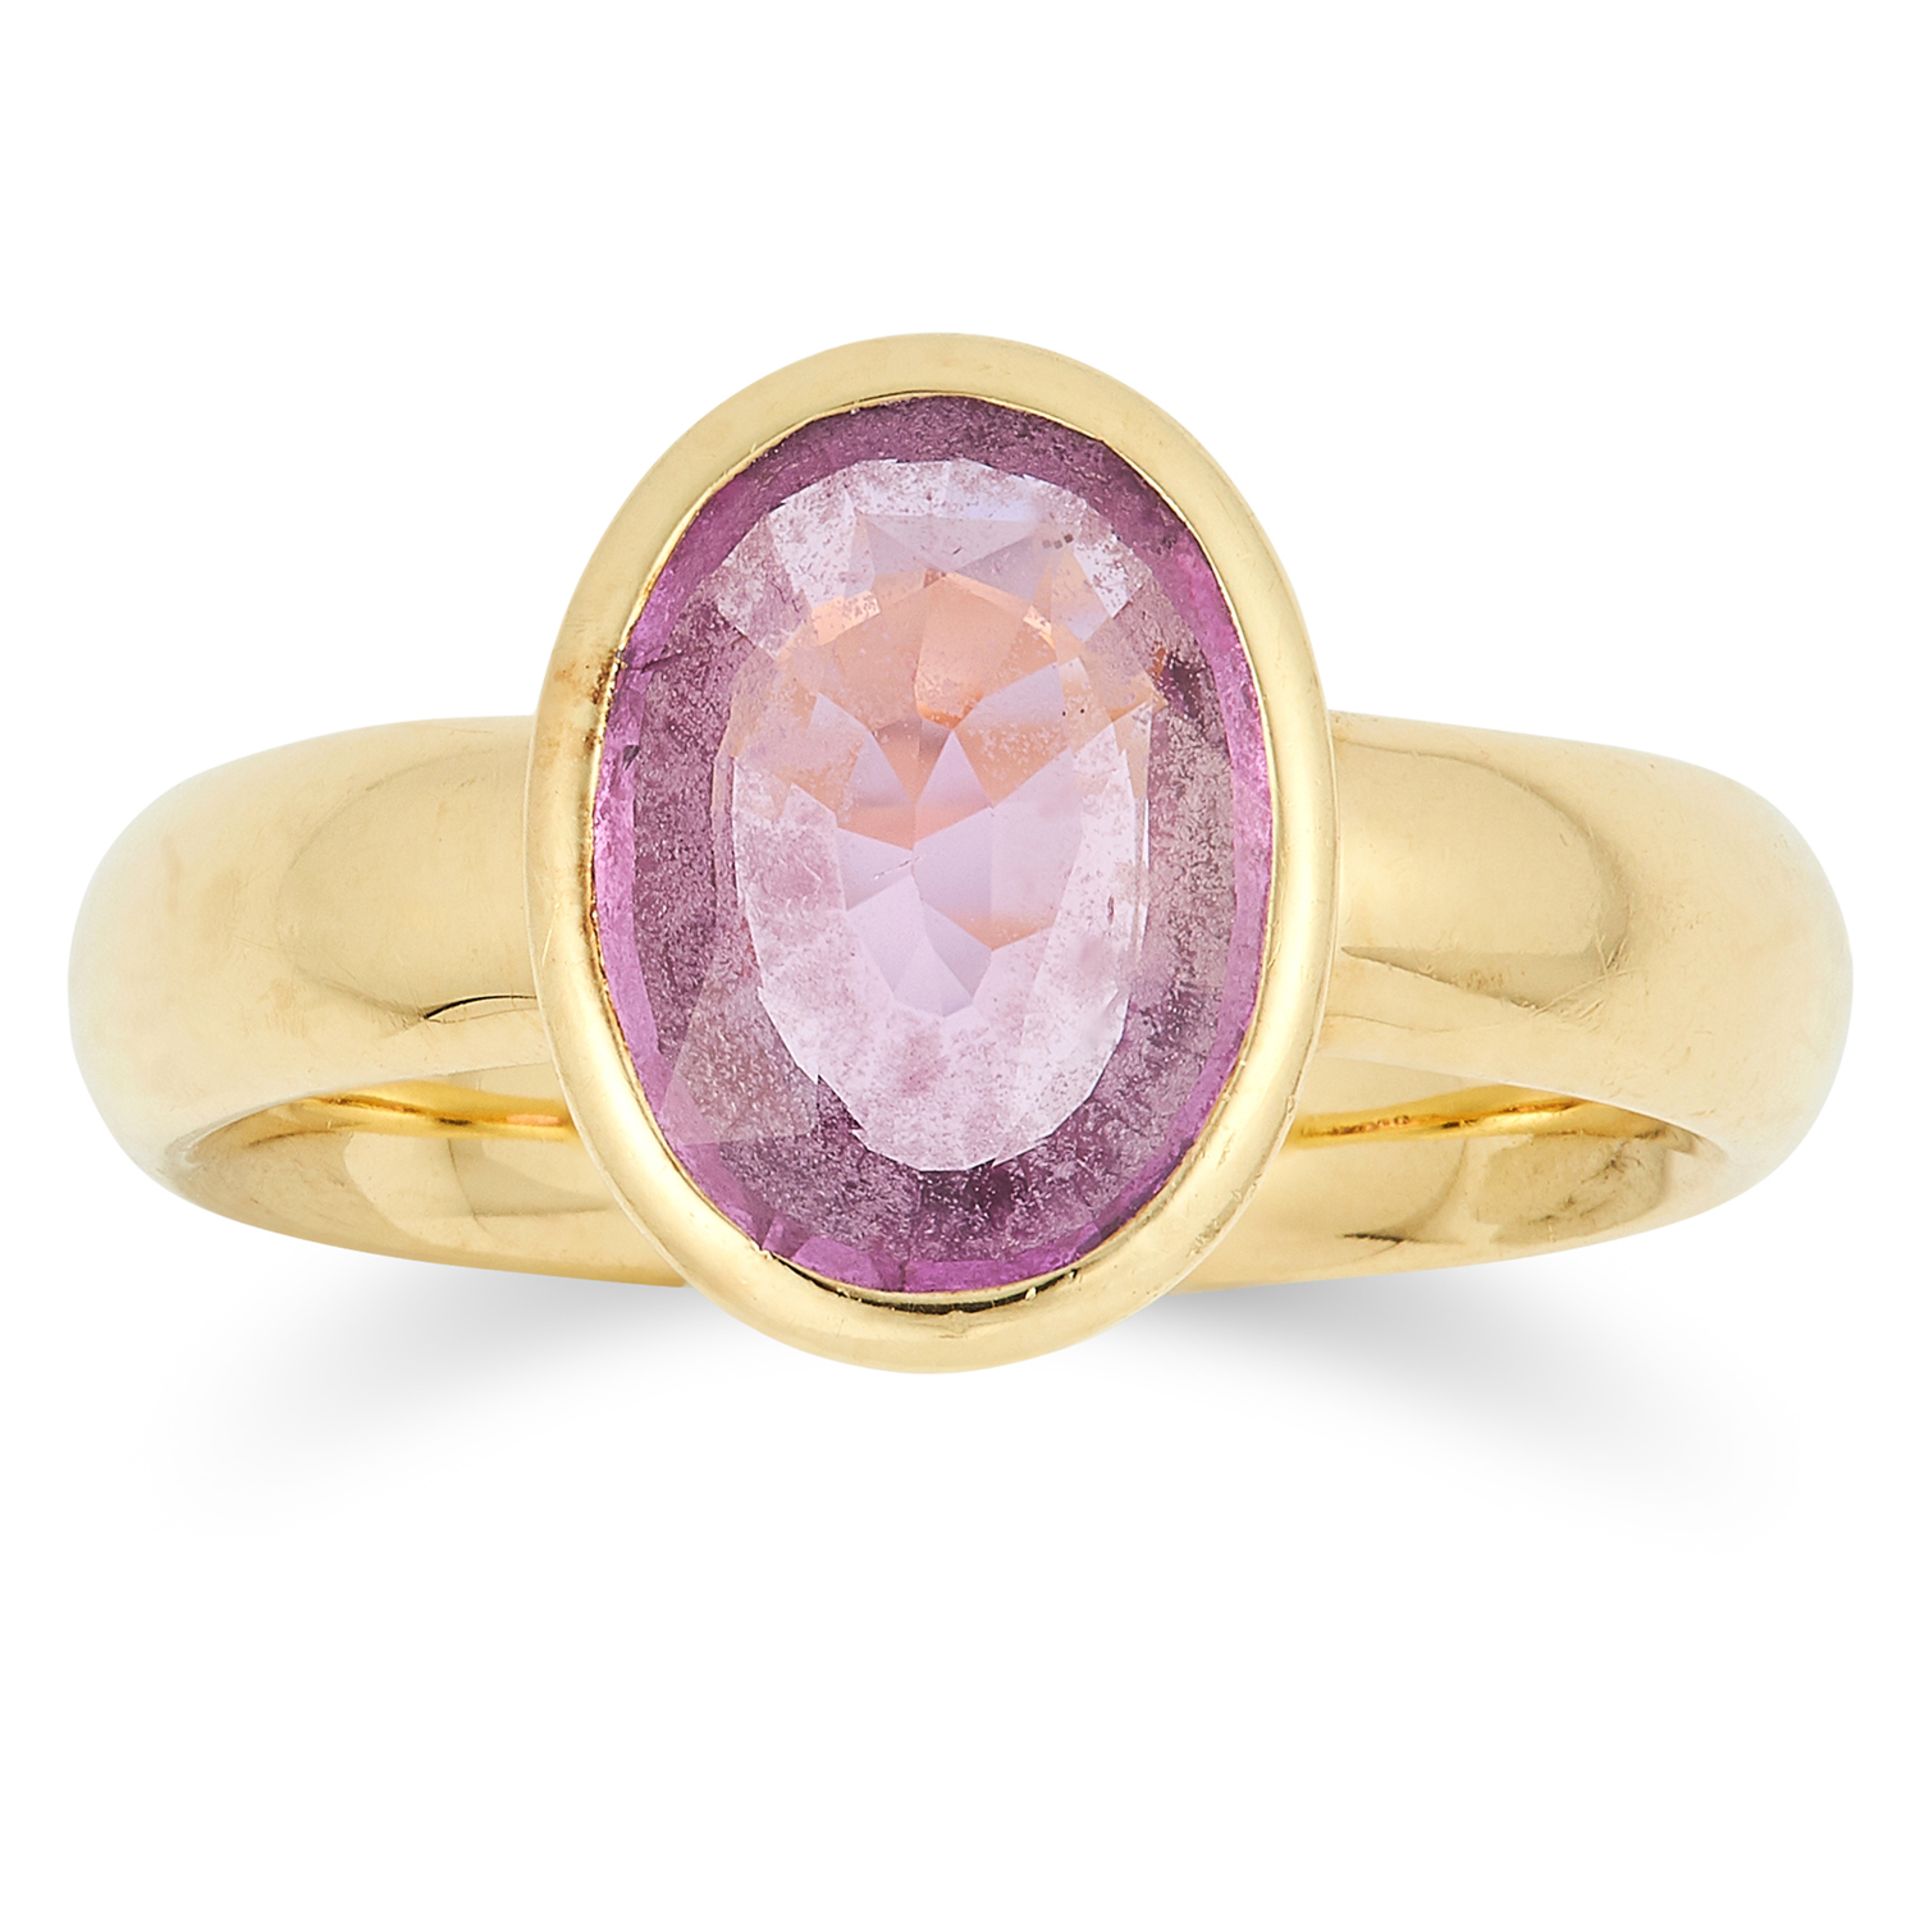 A PINK SAPPHIRE RING set with an oval cut pink sapphire, on later George Jensen band, size L / 5.